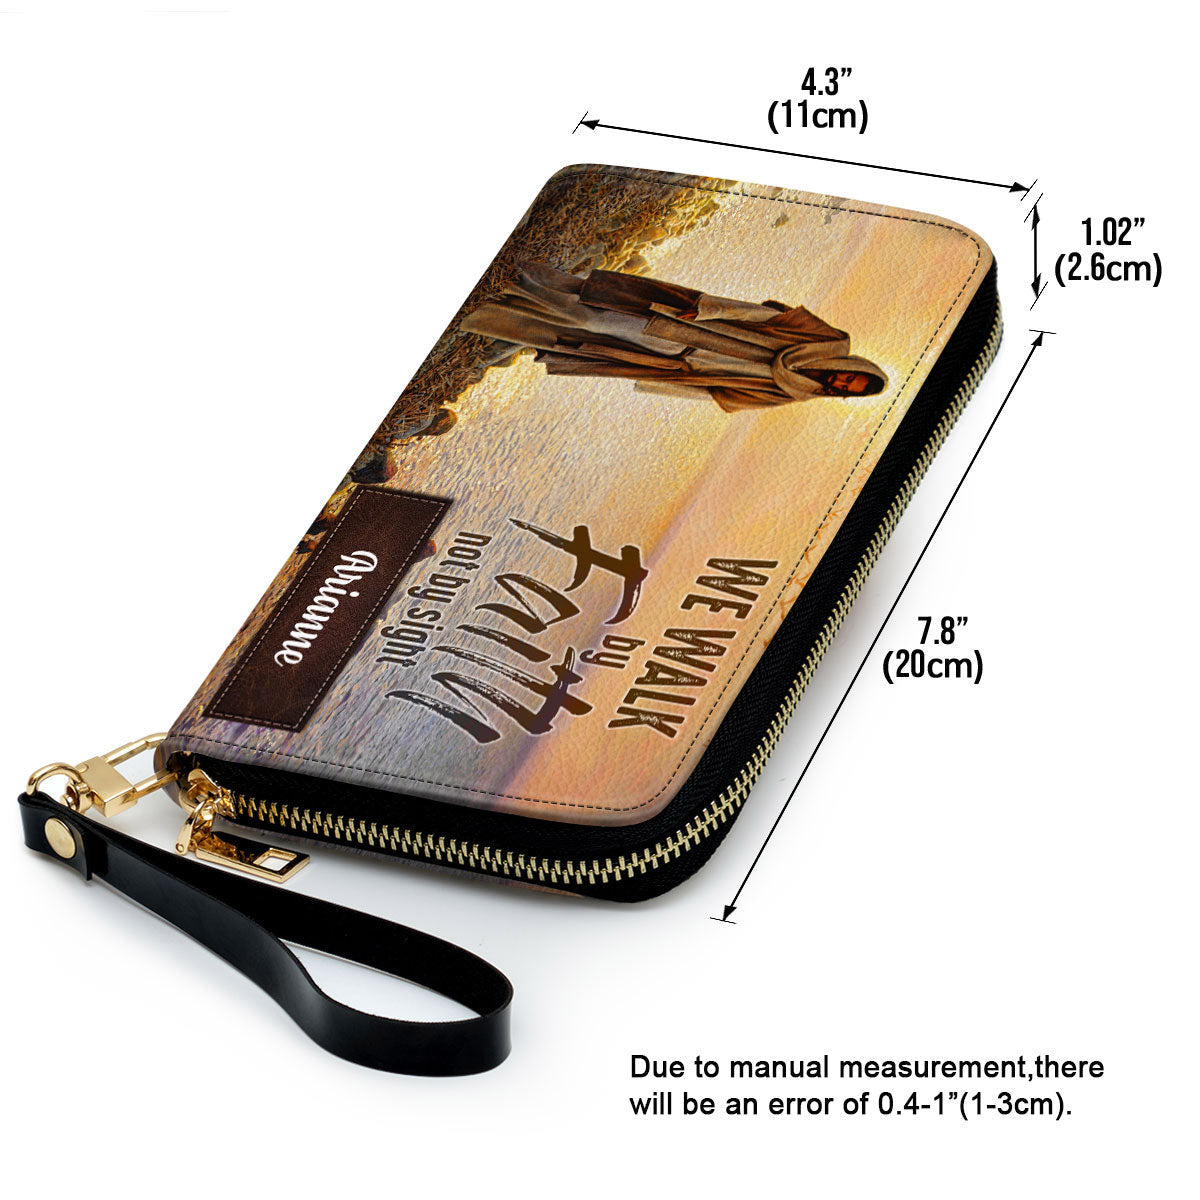 We Walk By Faith Not By Sight Jesus Clutch Purse For Women - Personalized Name - Christian Gifts For Women